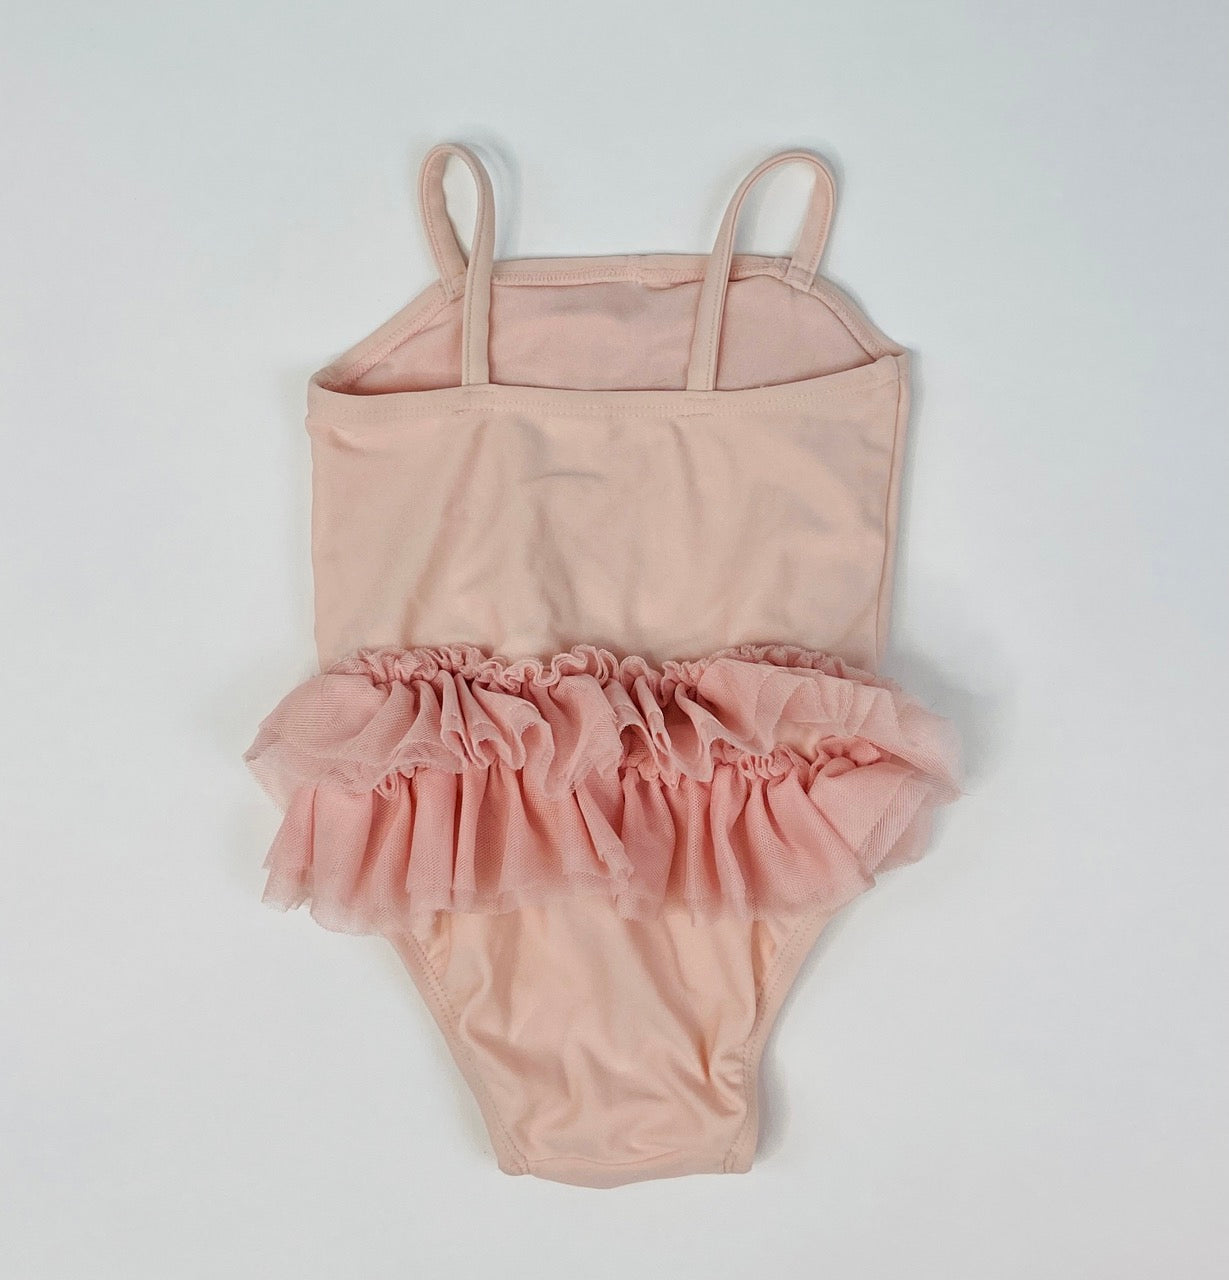 Pink Tutu One Piece Swimsuit- 6/12 Month